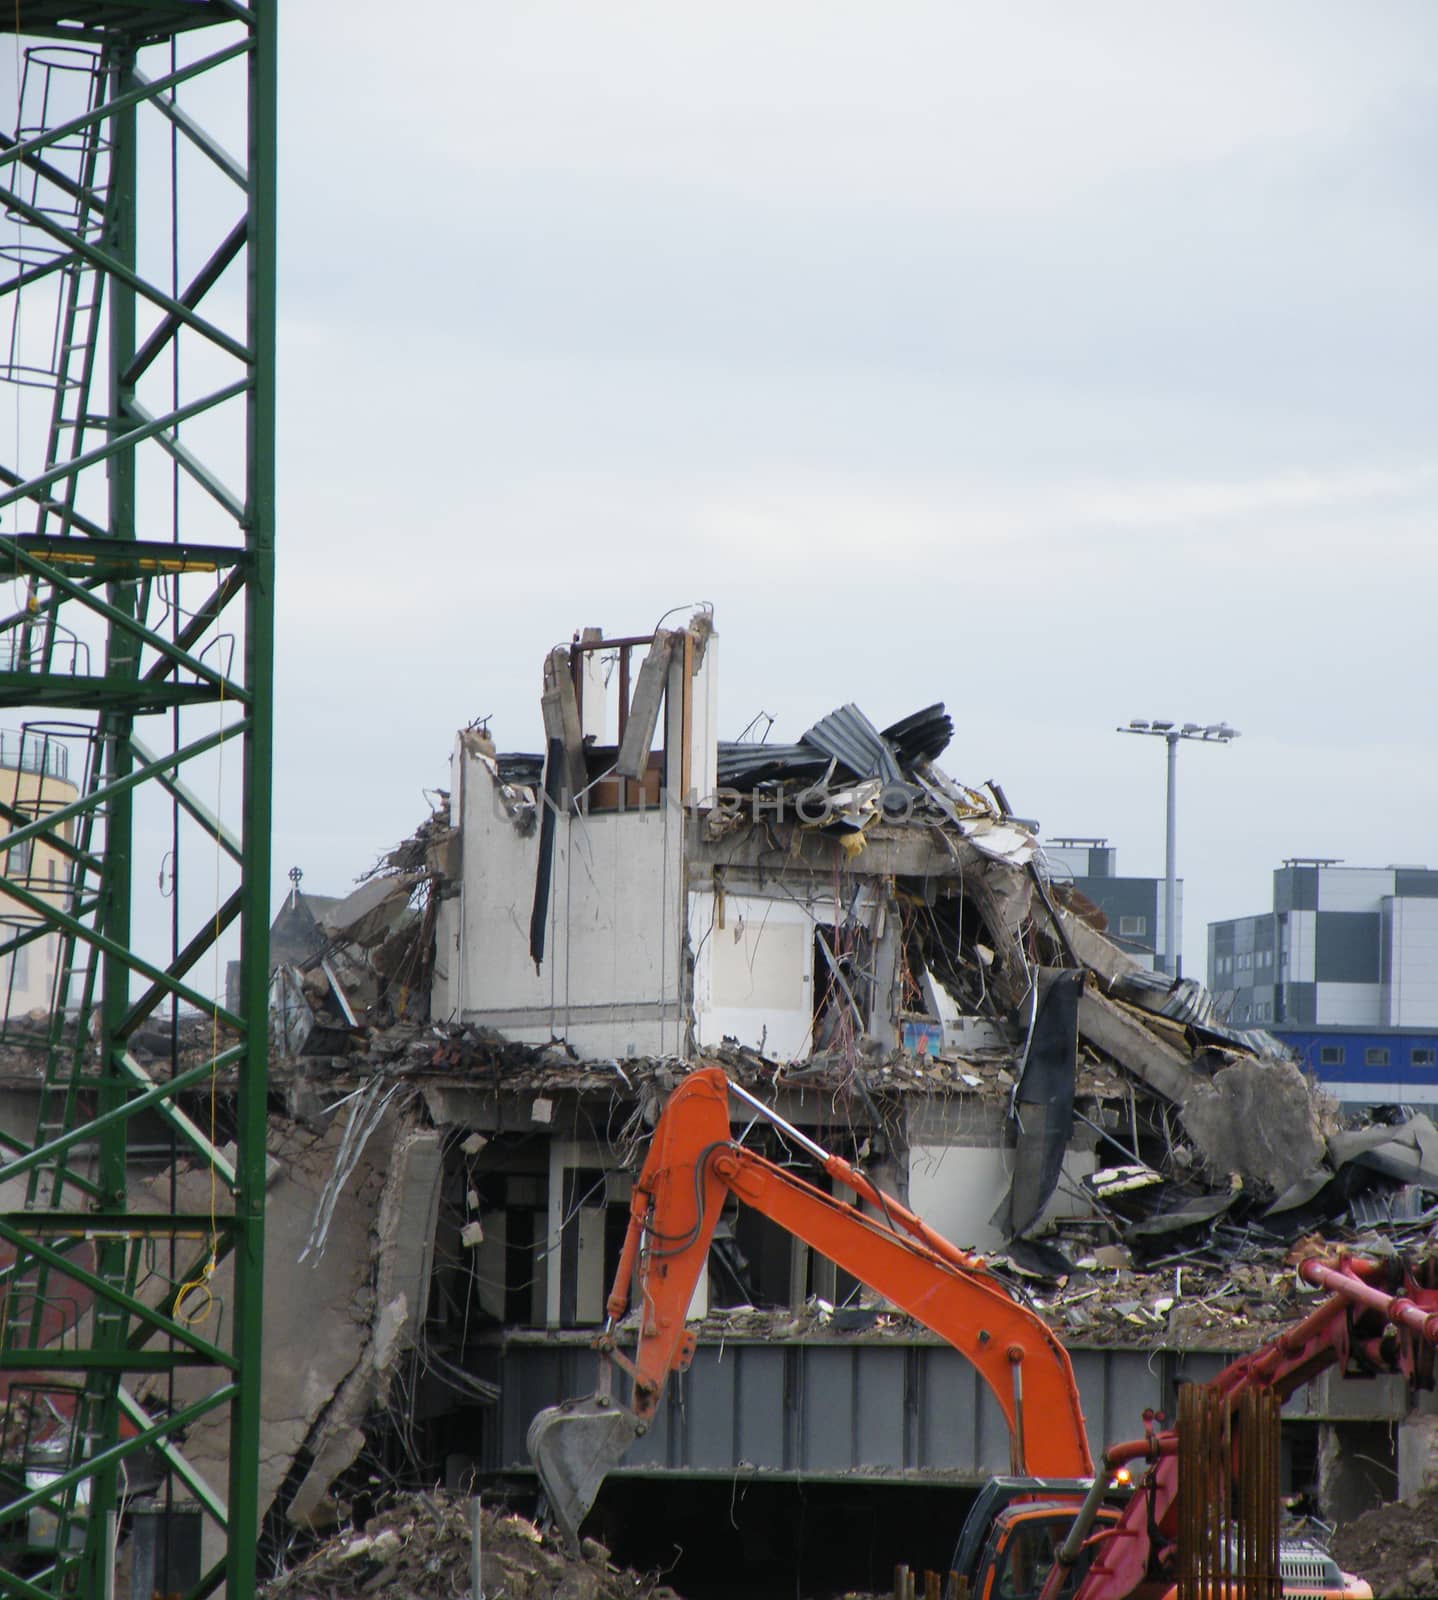 an orange digger with a backhoe working on a large urban demolition site with a metal tower crane at the edge of the frame and grey sky